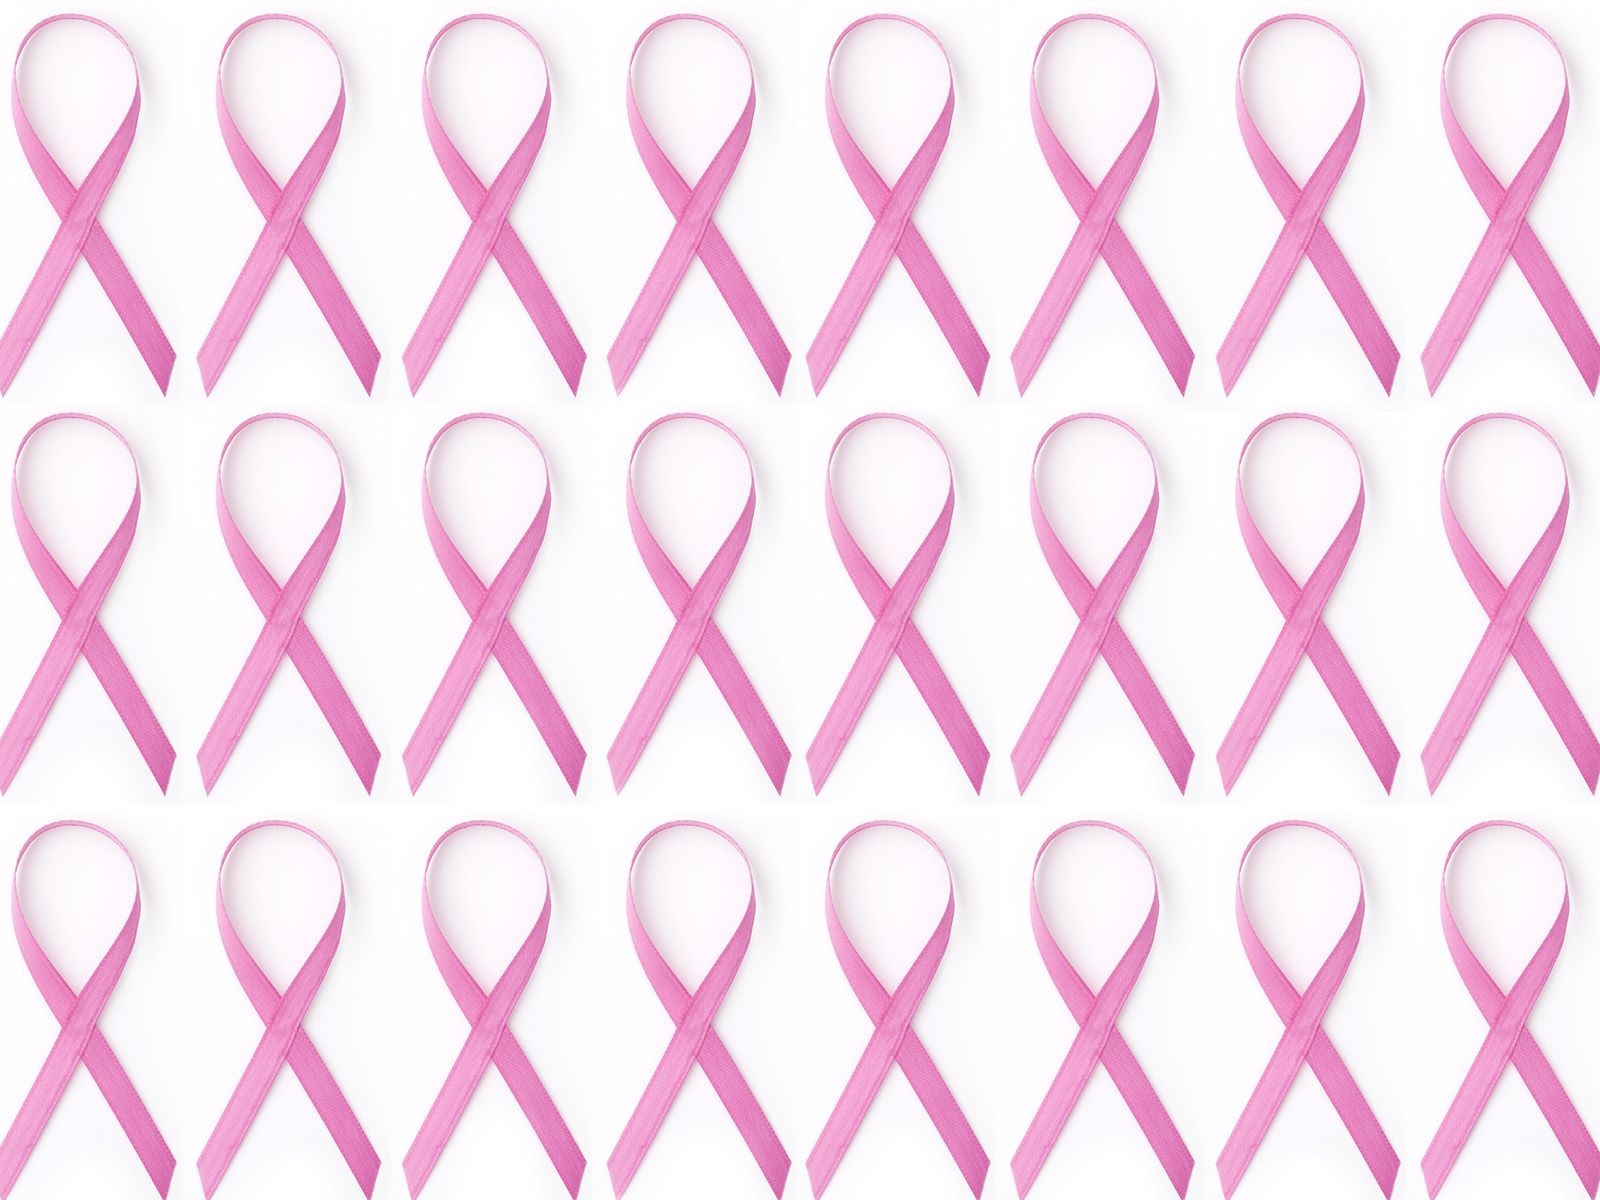 Breast Cancer Awareness Ribbon Wallpaper Vector Images over 200